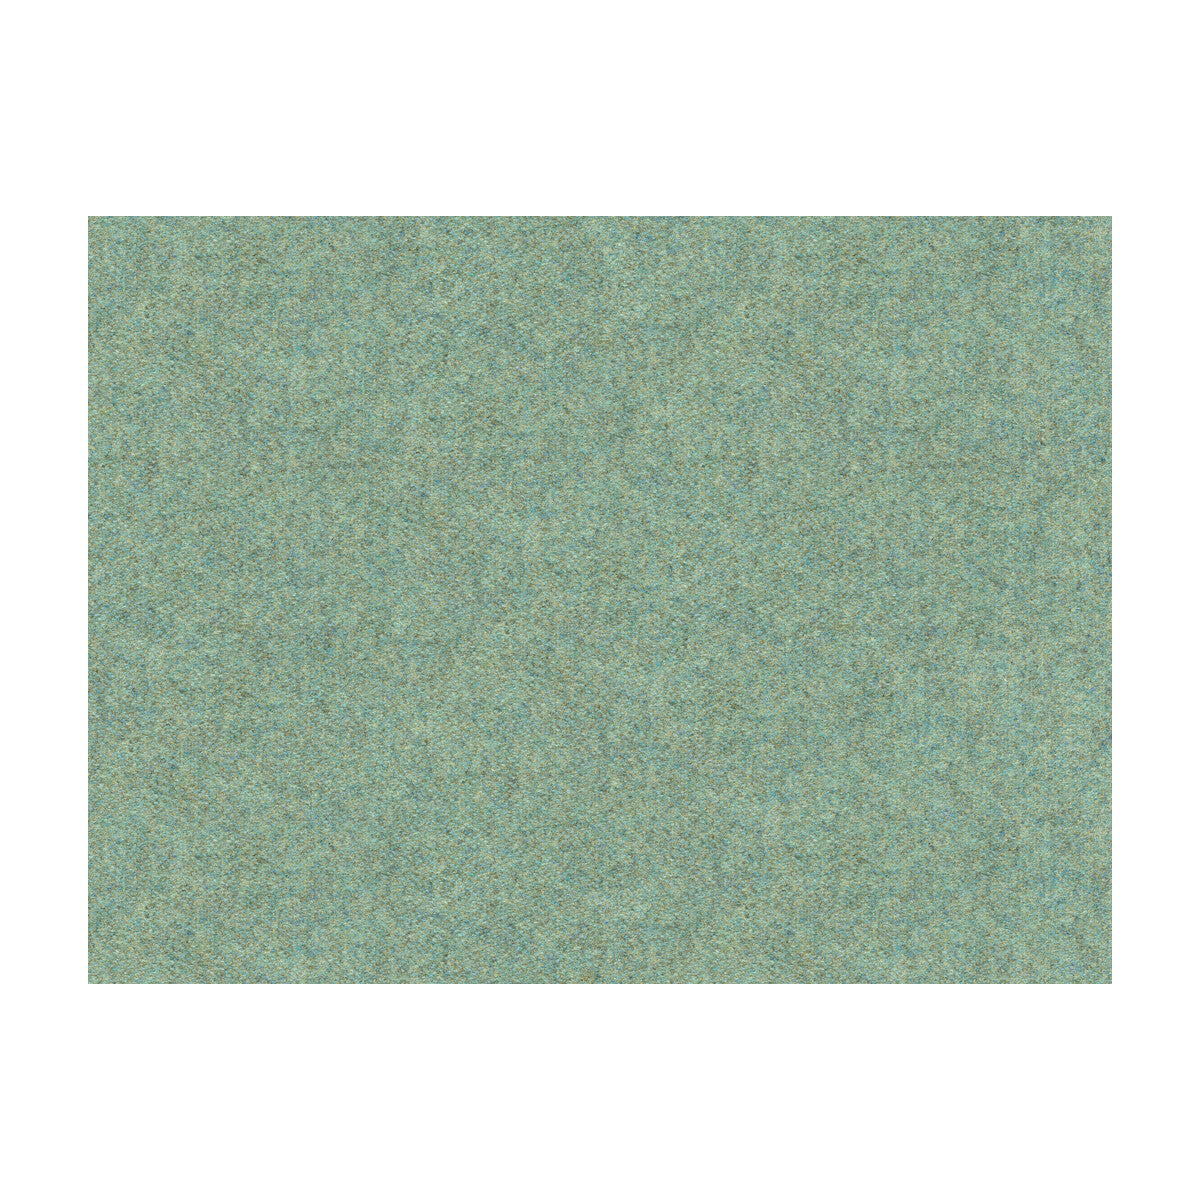 Chevalier Wool fabric in aqua color - pattern 8013149.1613.0 - by Brunschwig &amp; Fils